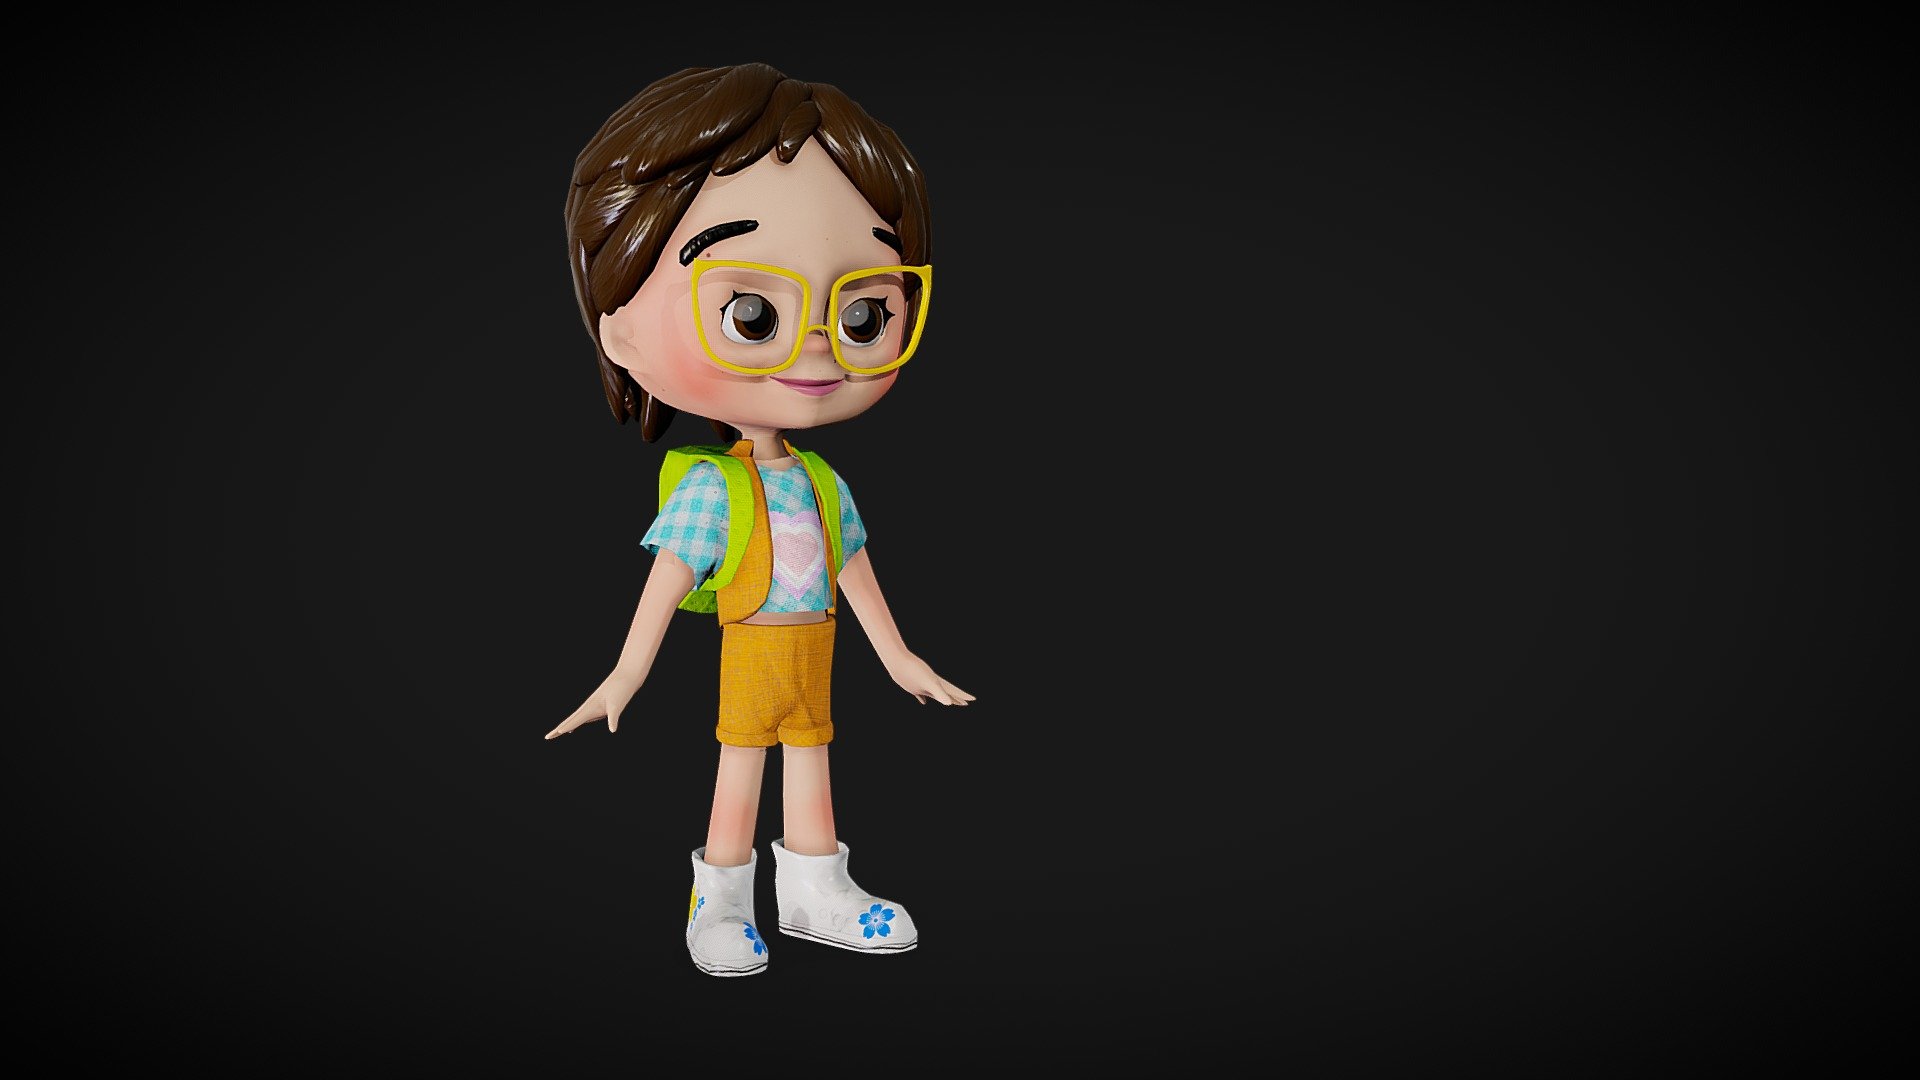 Anna - a wild and funny child always ready ready to get things done.
Modeling + Textureing 3d model